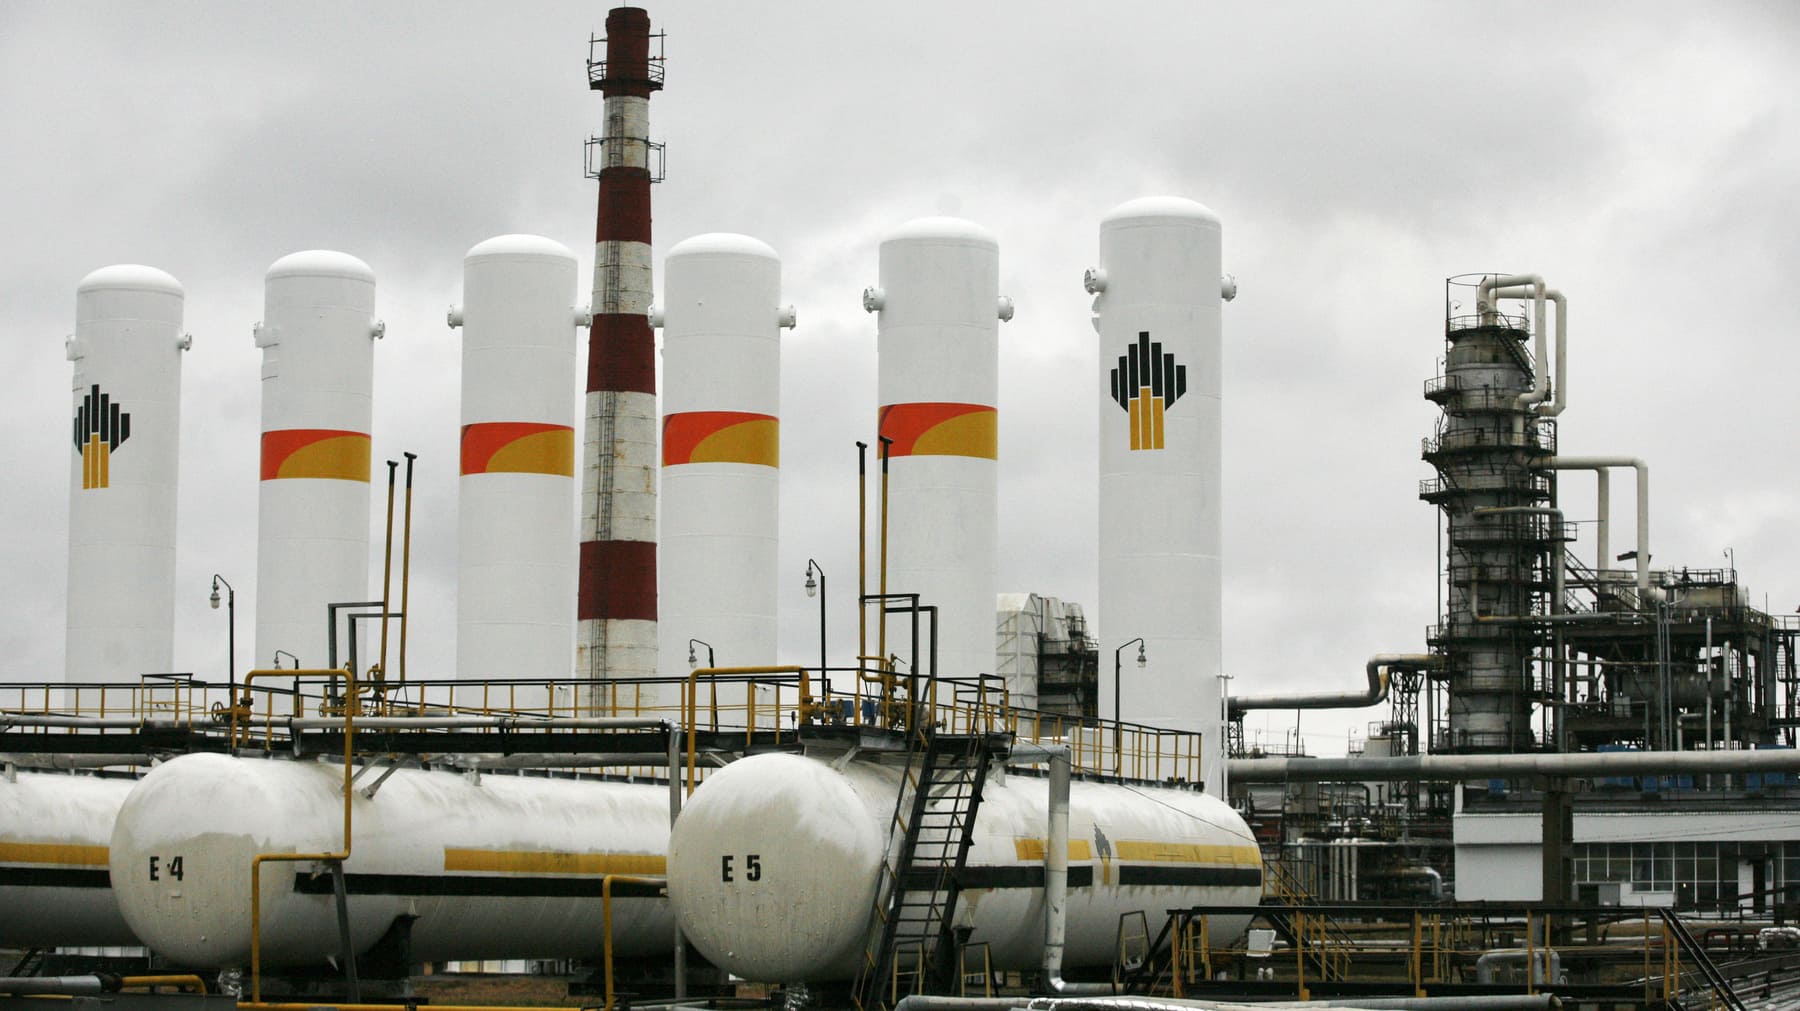 A report reveals a decline in Russian oil production by 300,000 barrels per day